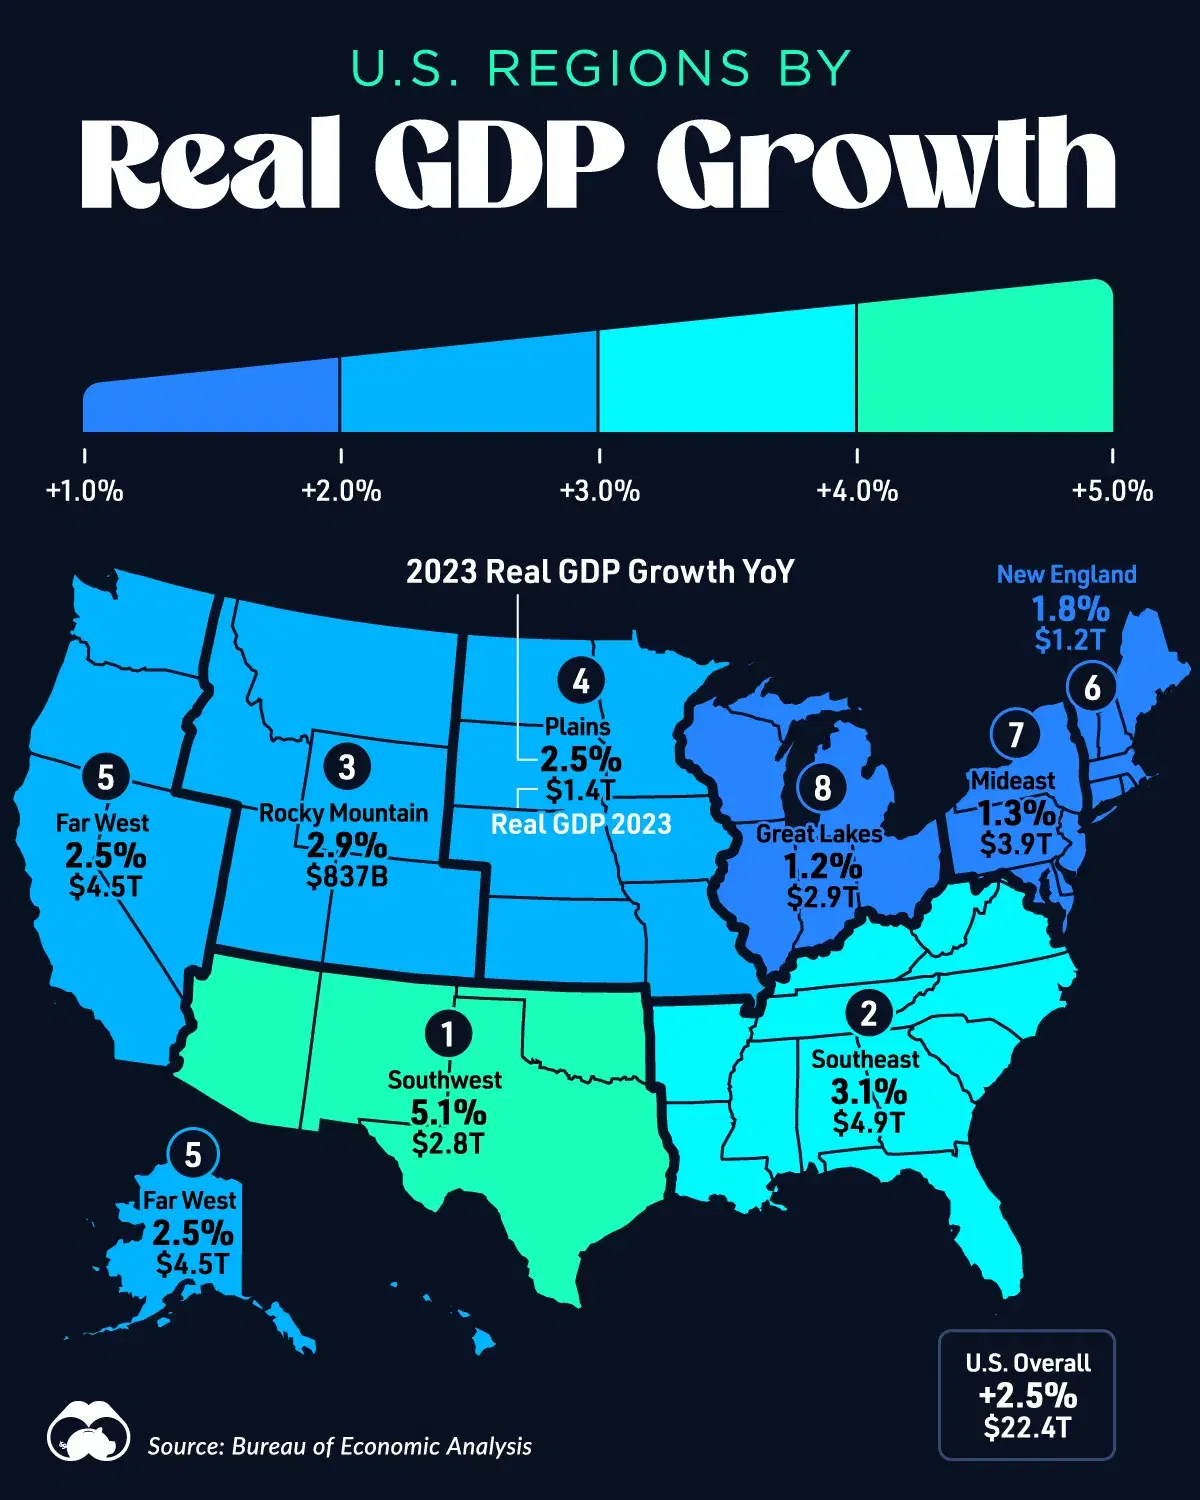 The Real GDP Growth of U.S. Regions in 2023